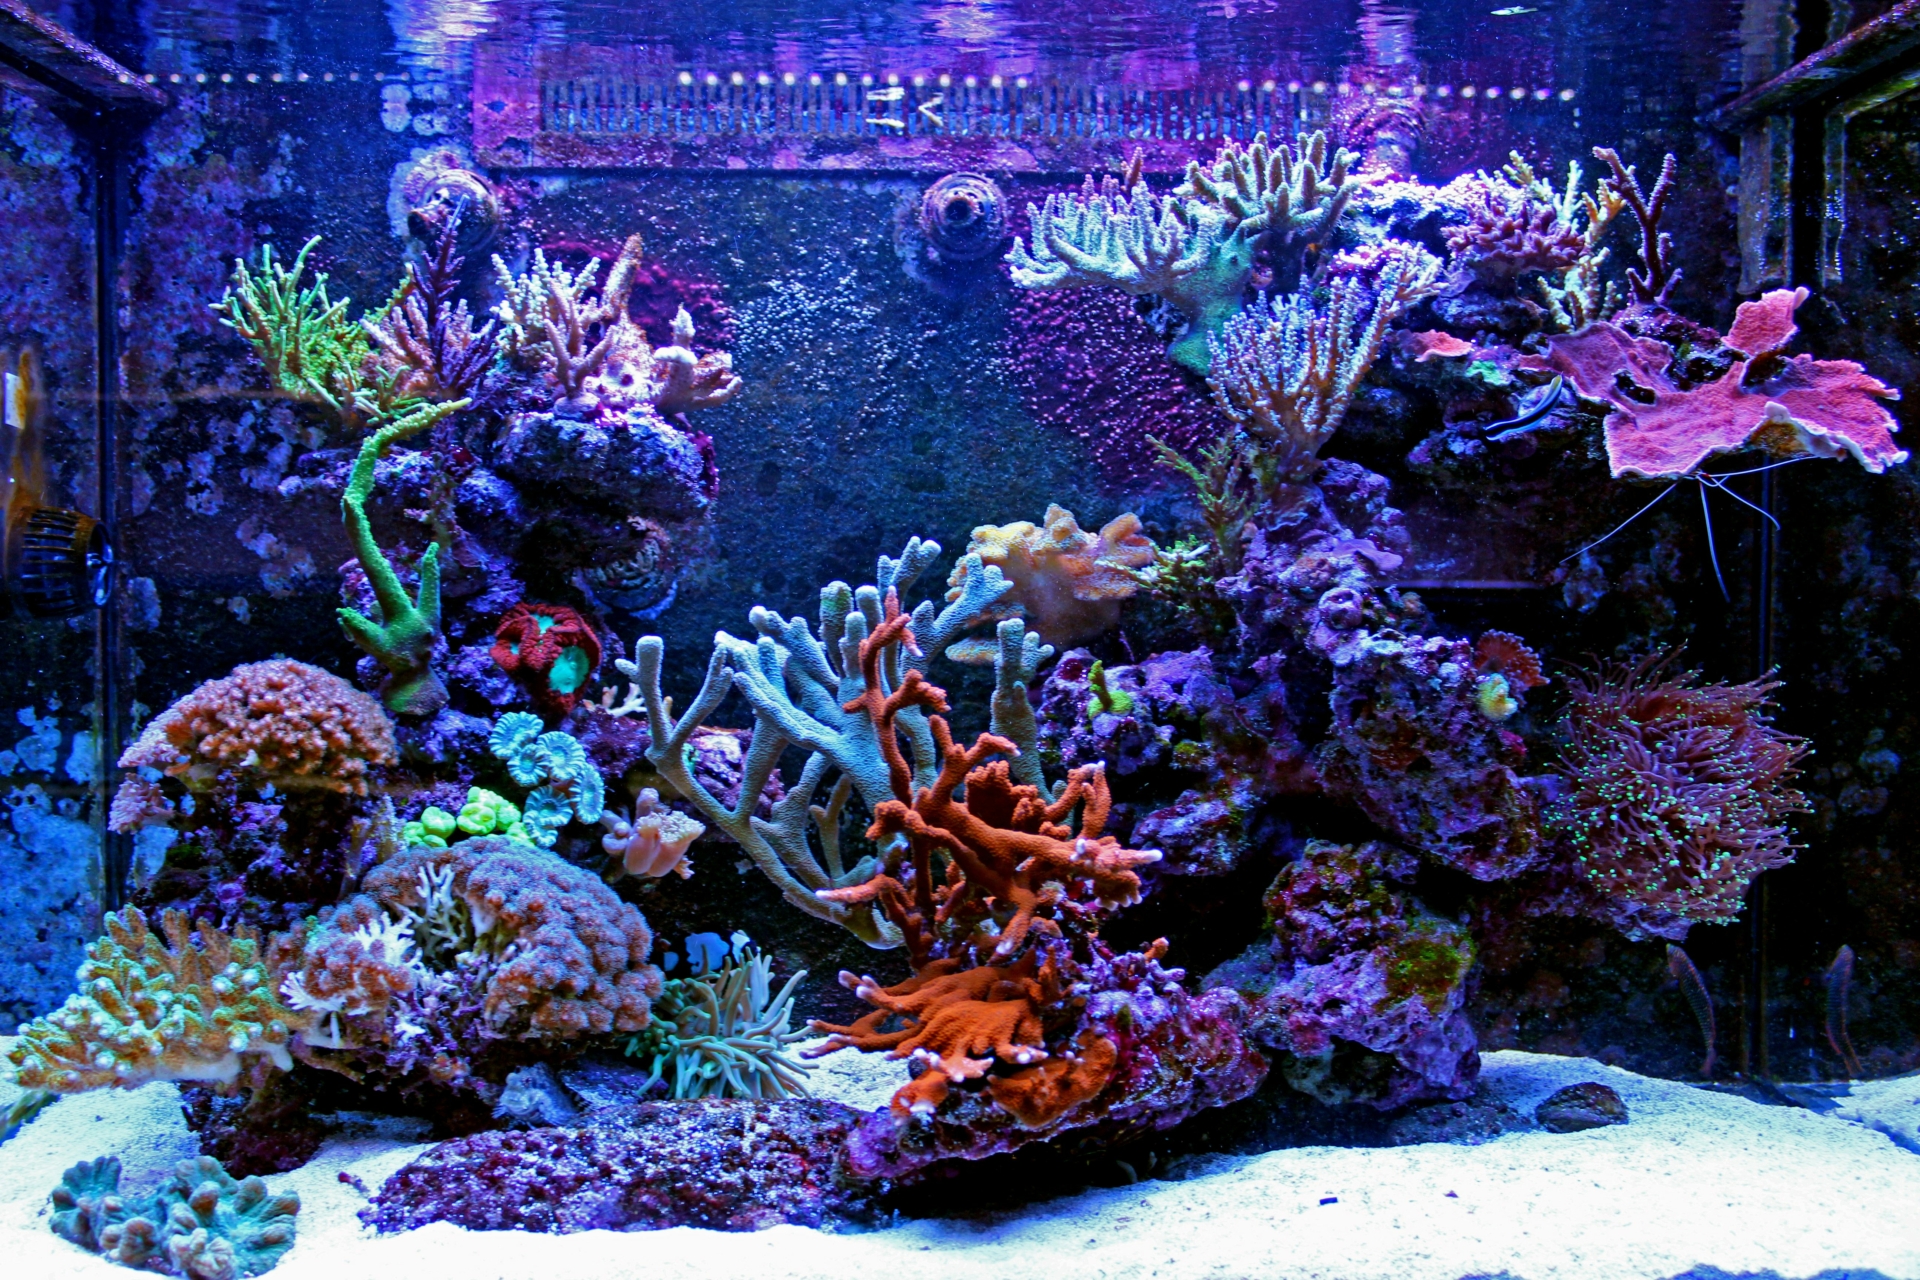 Fishtank with lots of coral inside